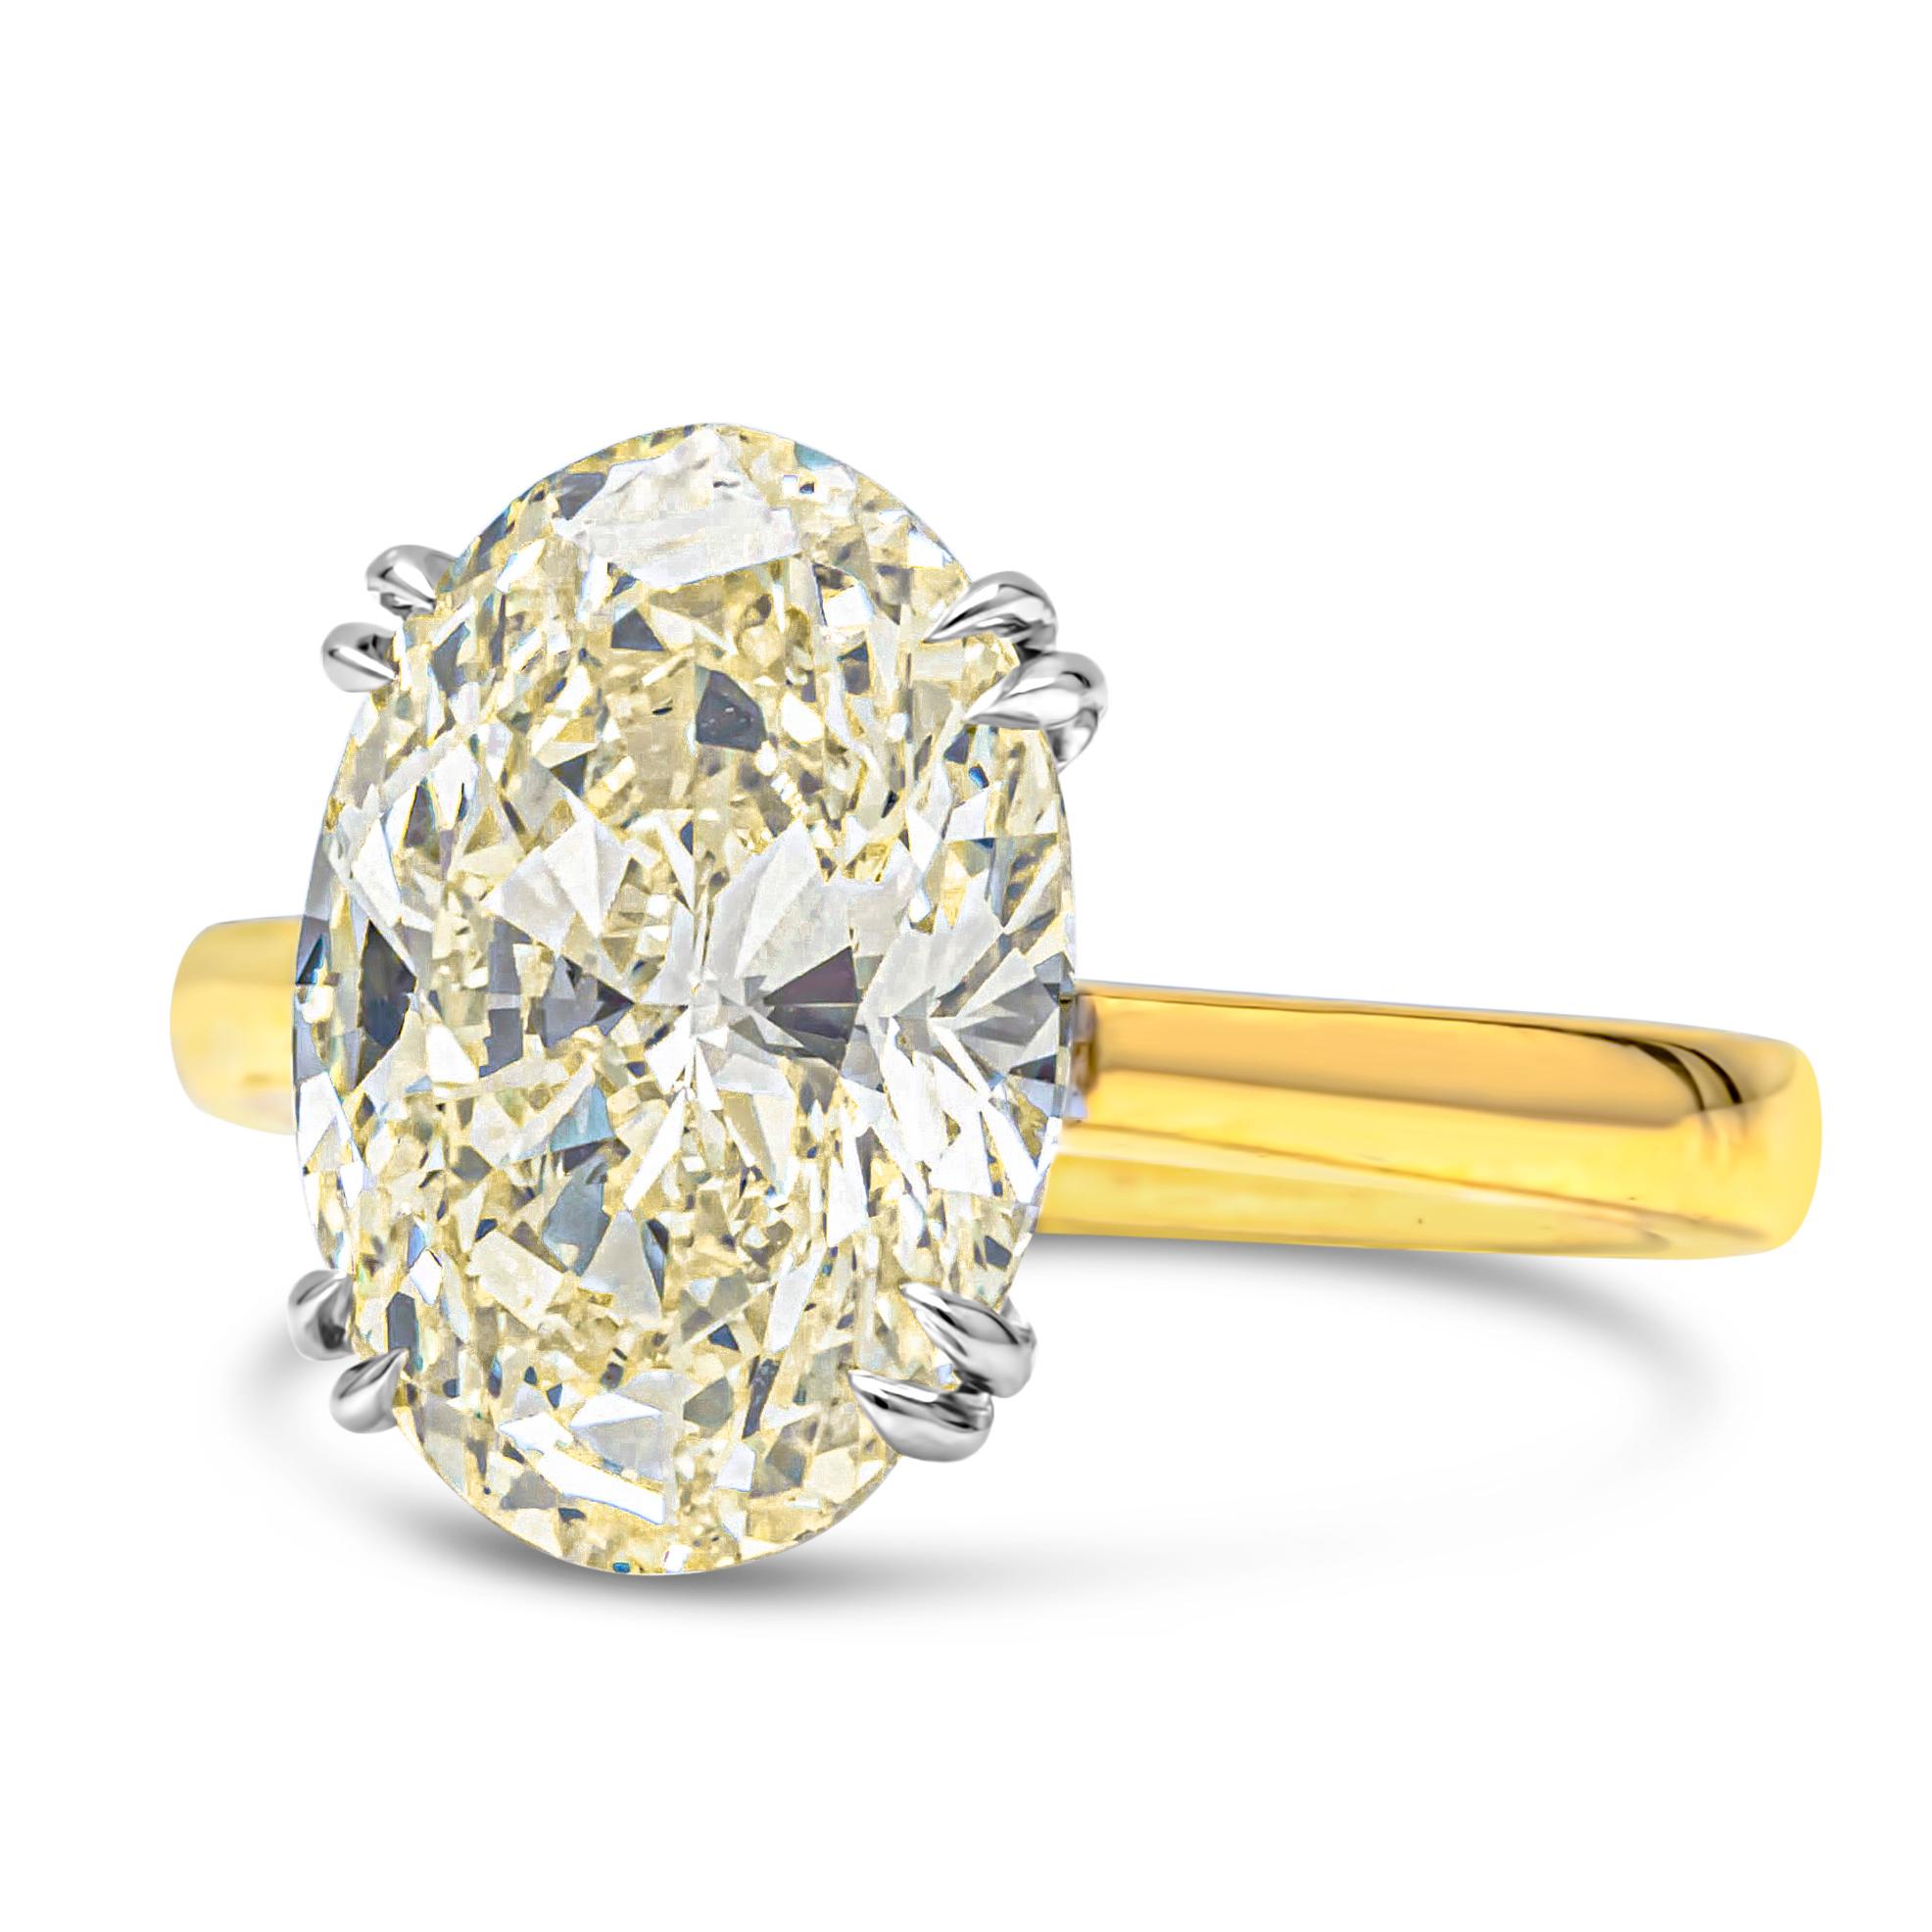 This beautiful high end jewelry solitaire engagement ring showcasing a GIA Certified 5.47 carats oval cut diamond, M Color and VVS2 in Clarity. Set in a double claw prongs setting in platinum and perfectly made in 18K Yellow Gold band. 

Roman